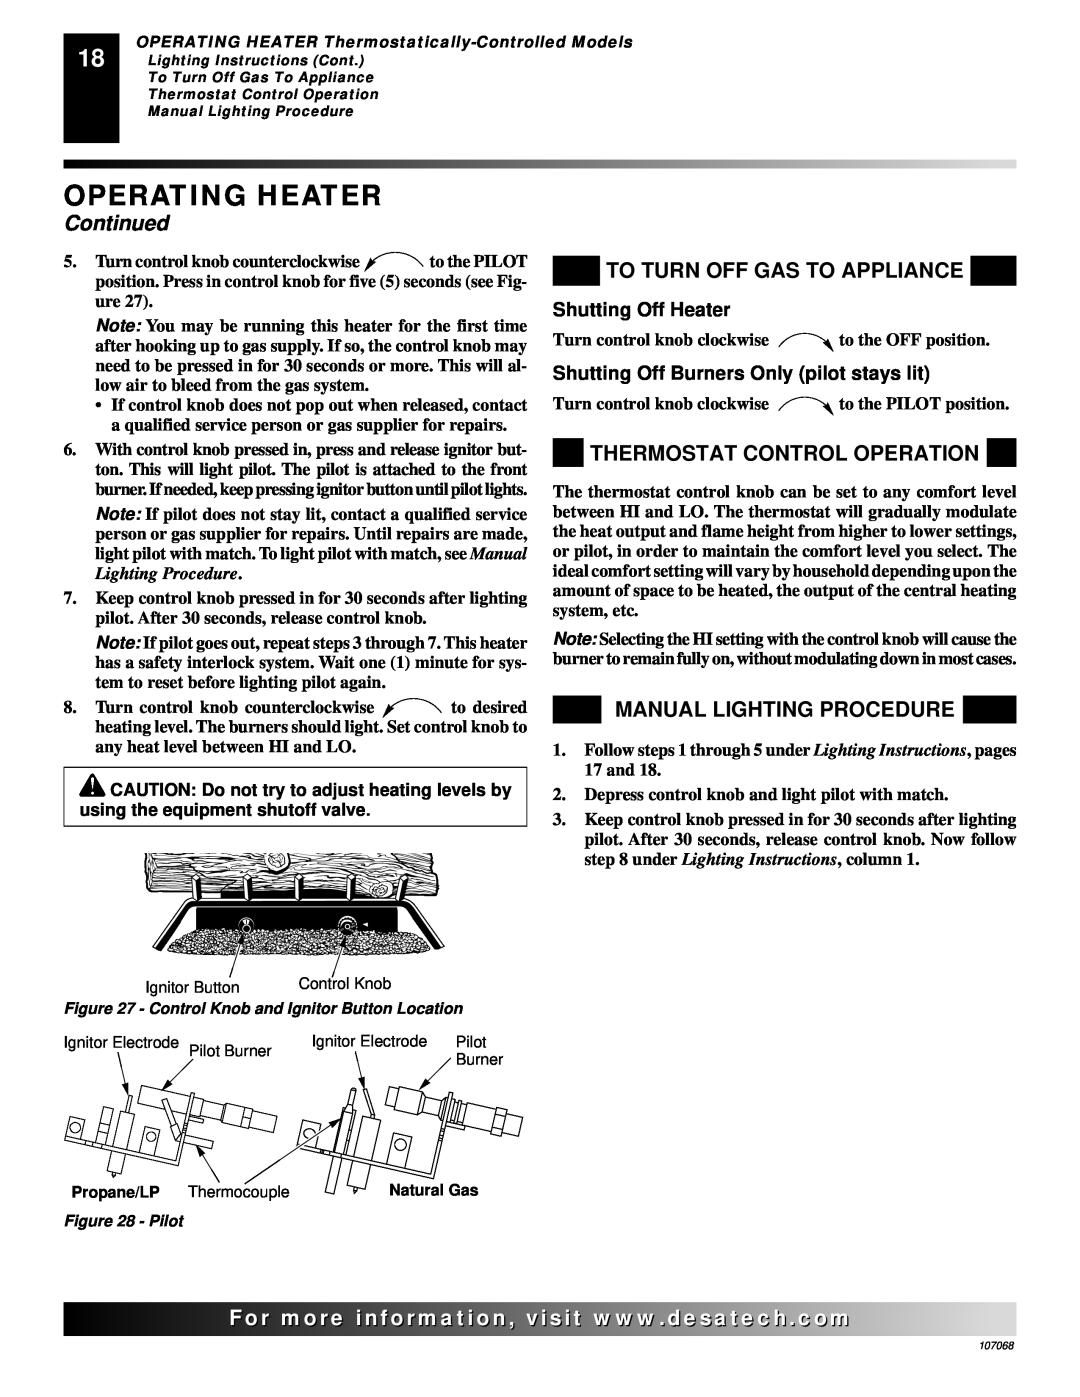 Desa CLD3924PTA, CLD3924NTA Thermostat Control Operation, Operating Heater, Continued, To Turn Off Gas To Appliance 